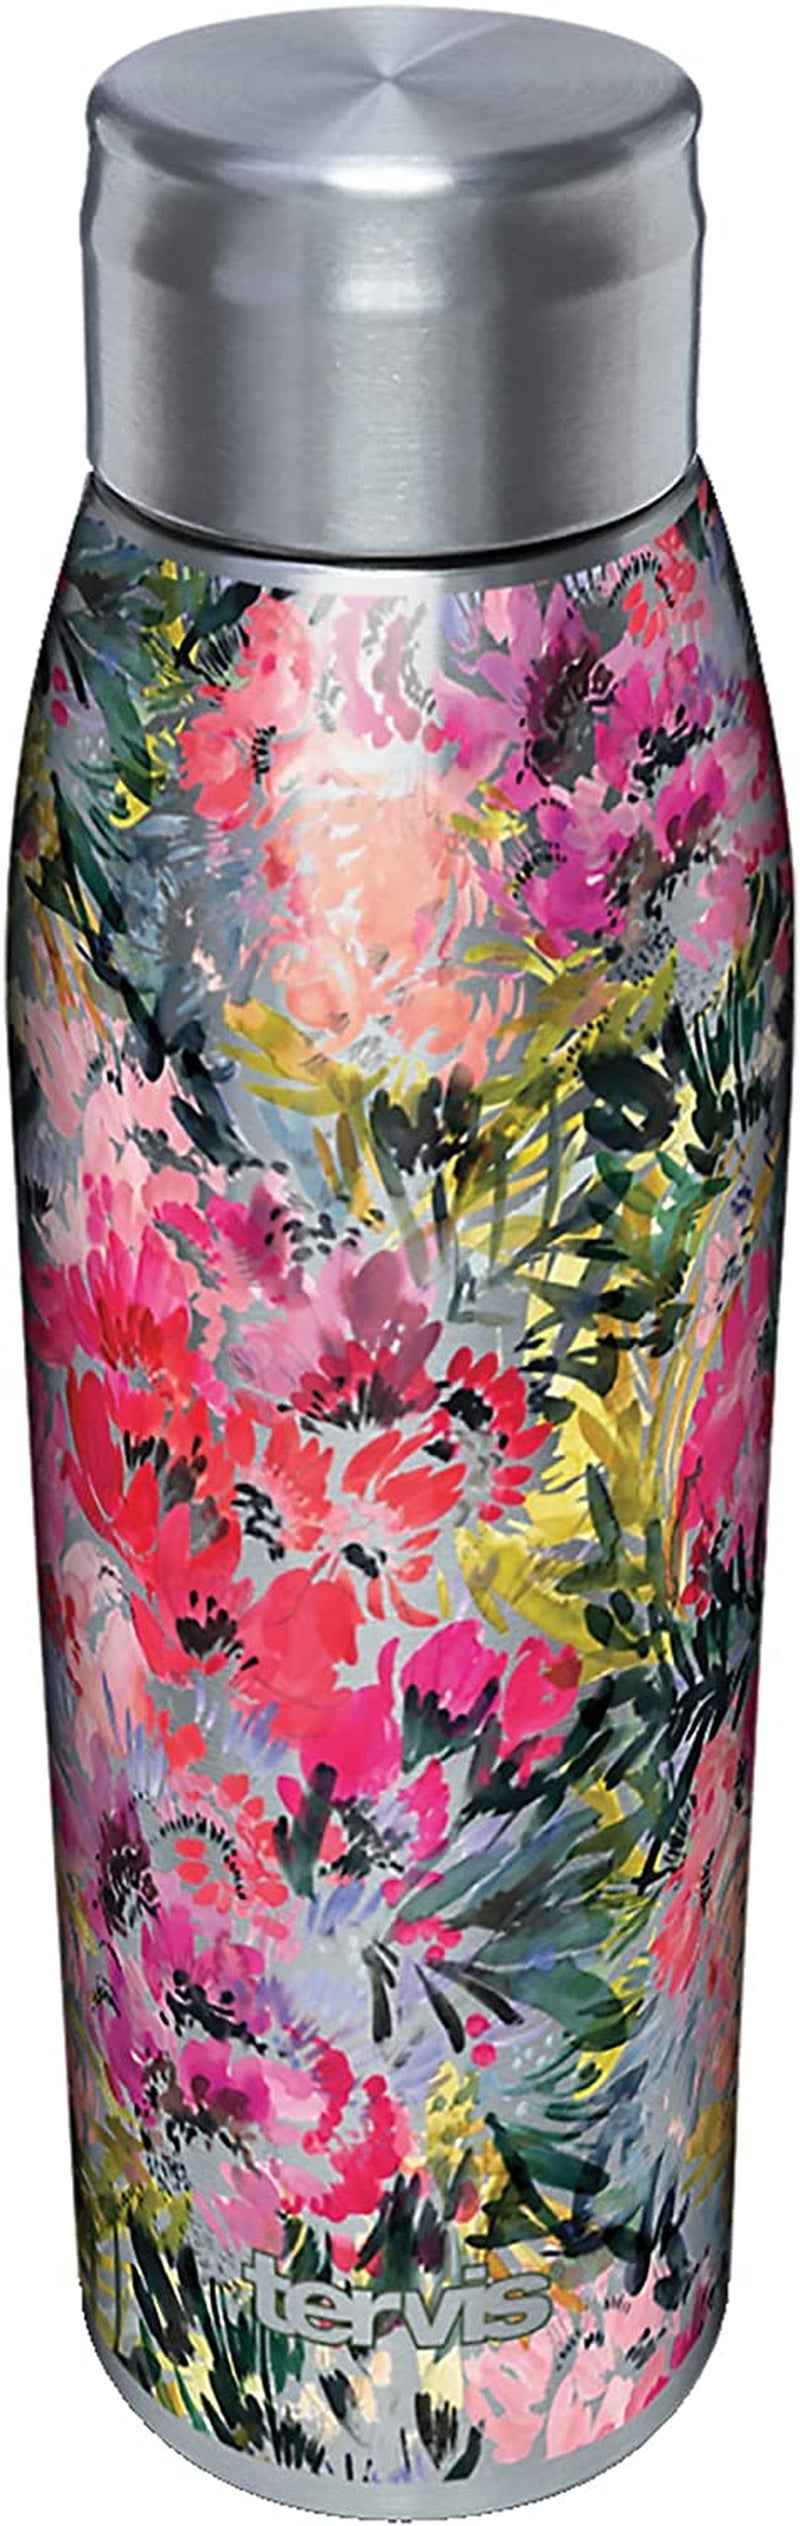 Tervis Made in USA Double Walled Kelly Ventura Floral Collection Insulated Tumbler Cup Keeps Drinks Cold & Hot, 16Oz 4Pk - Classic, Assorted Home & Garden > Kitchen & Dining > Tableware > Drinkware Tervis Perennial Garden 17oz Water Bottle - Stainless Steel 